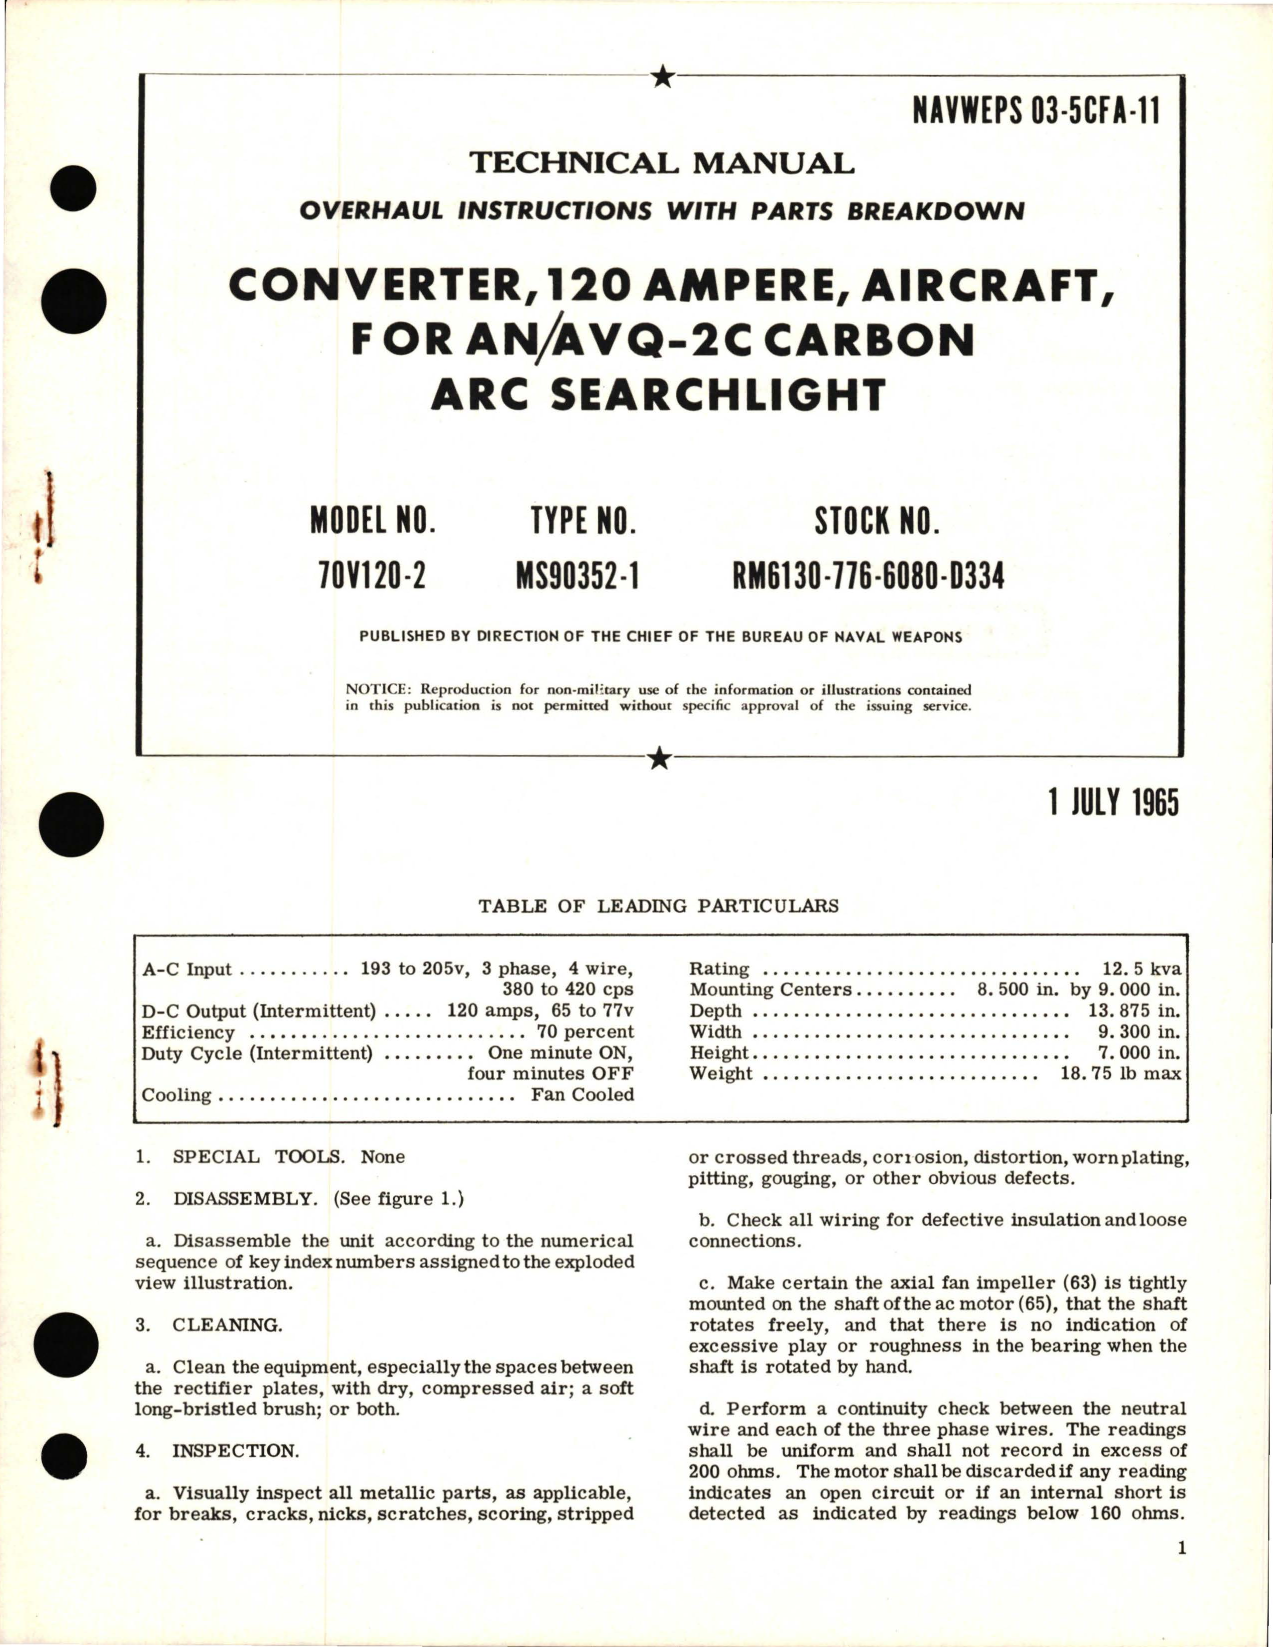 Sample page 1 from AirCorps Library document: Overhaul Instructions with Parts Breakdown for Aircraft Converter, 120 Ampere for AN-AVQ-2C Carbon ARC Searchlight - Model 70V120-2